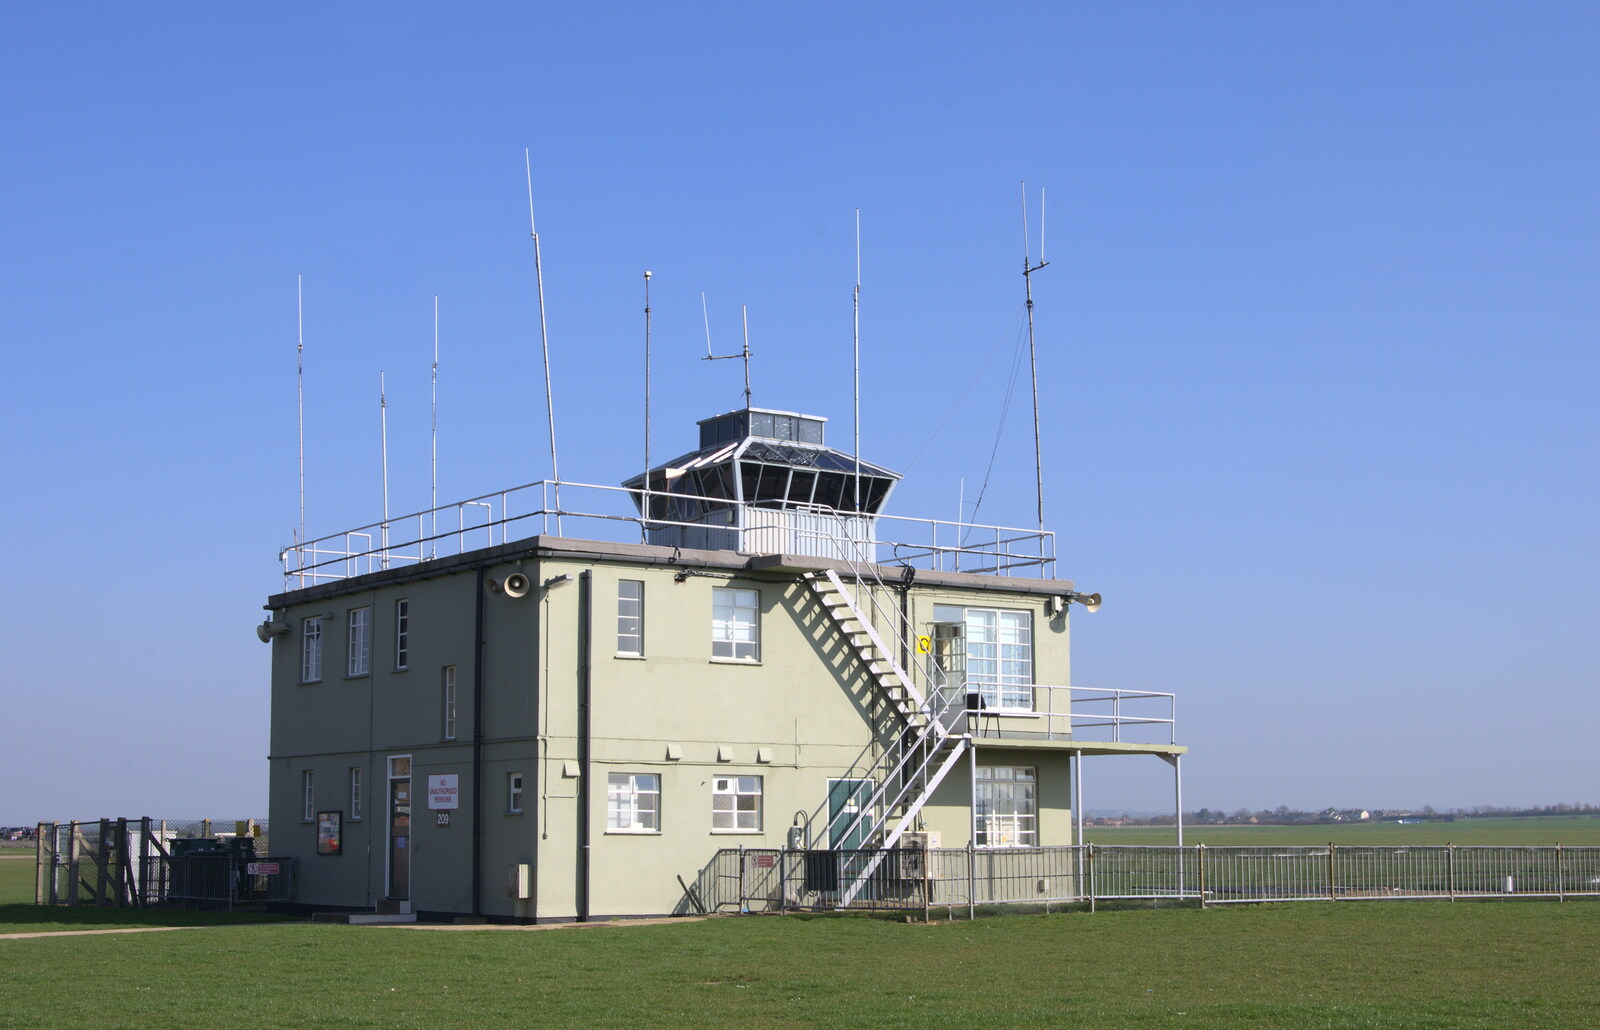 Duxford's control tower from A Day Out at Duxford, Cambridgeshire - 9th March 2014